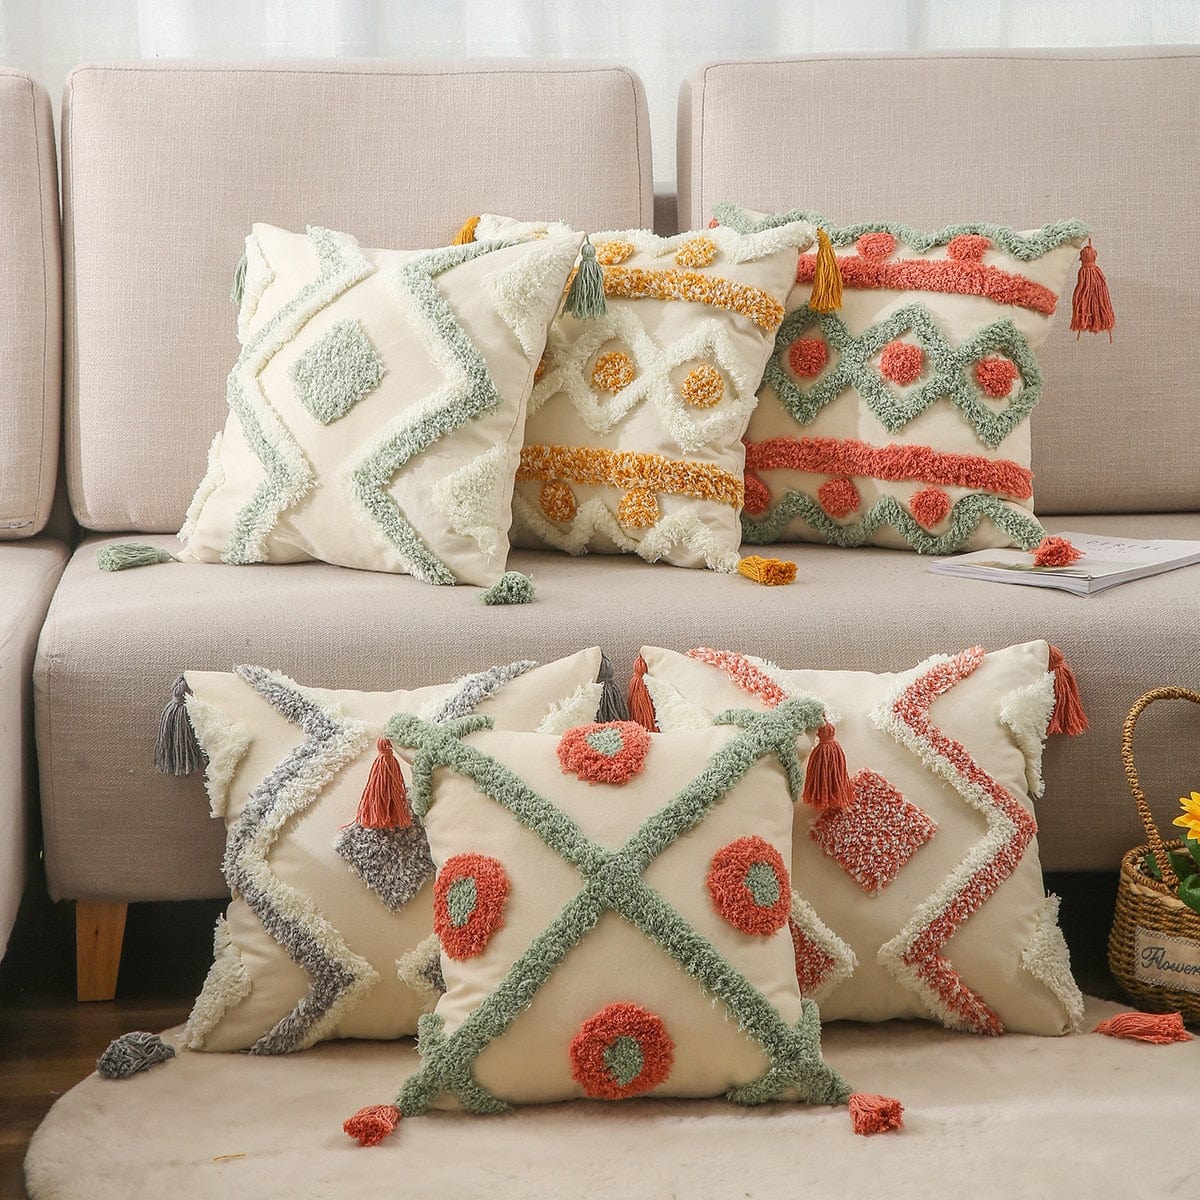 wickedafstore Geometric Tufted Cushion Covers